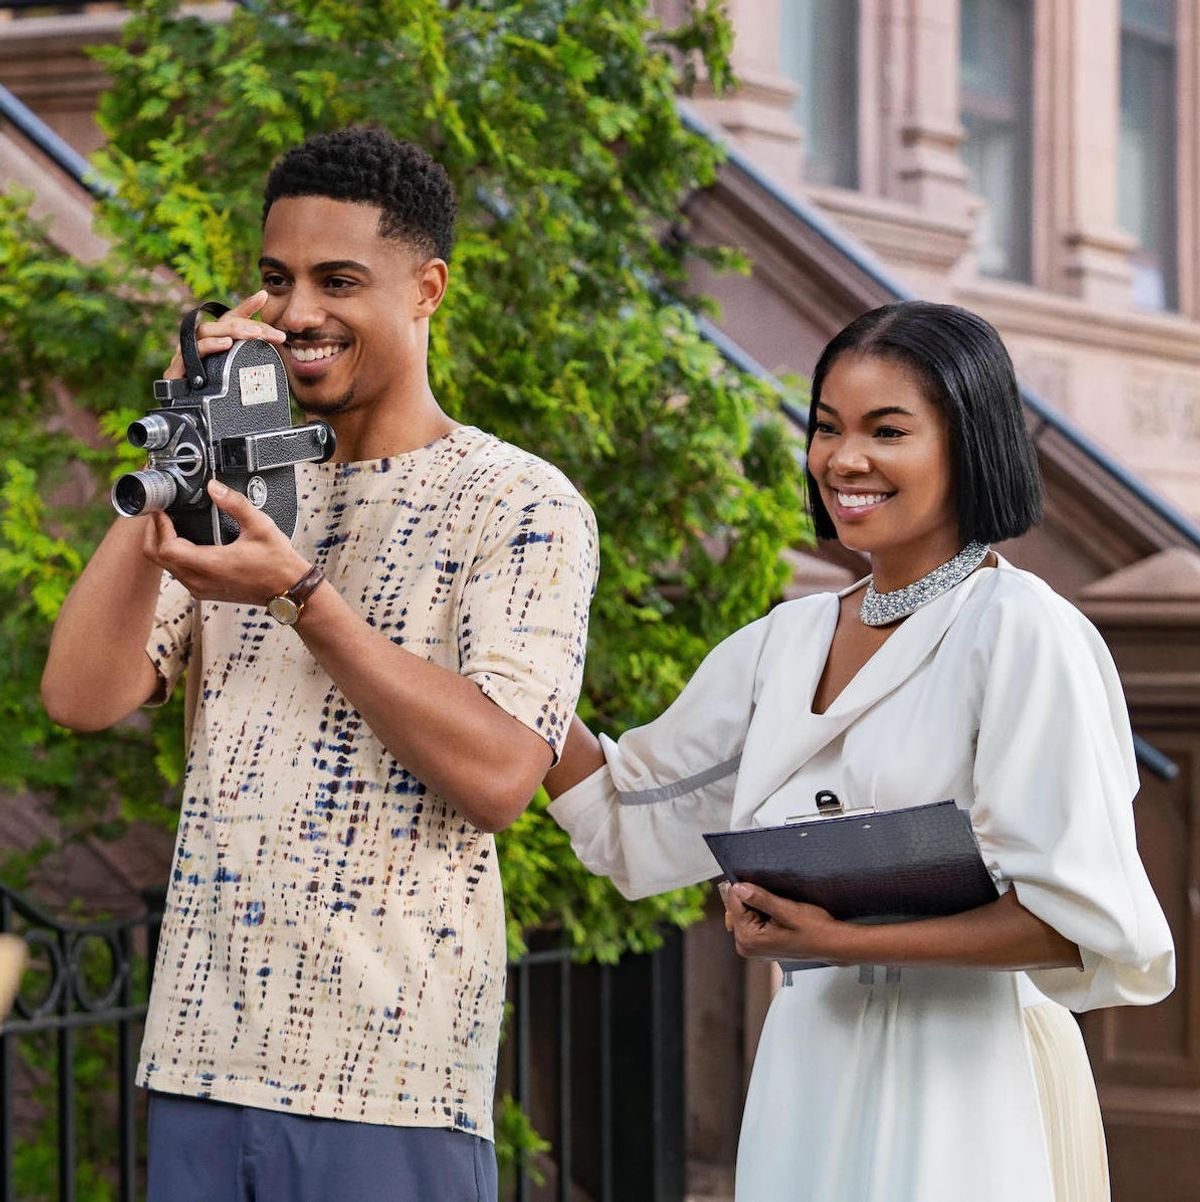 Keith Powers as Eric and Gabrielle Union as Jenna in The Perfect Find tribeca film festival